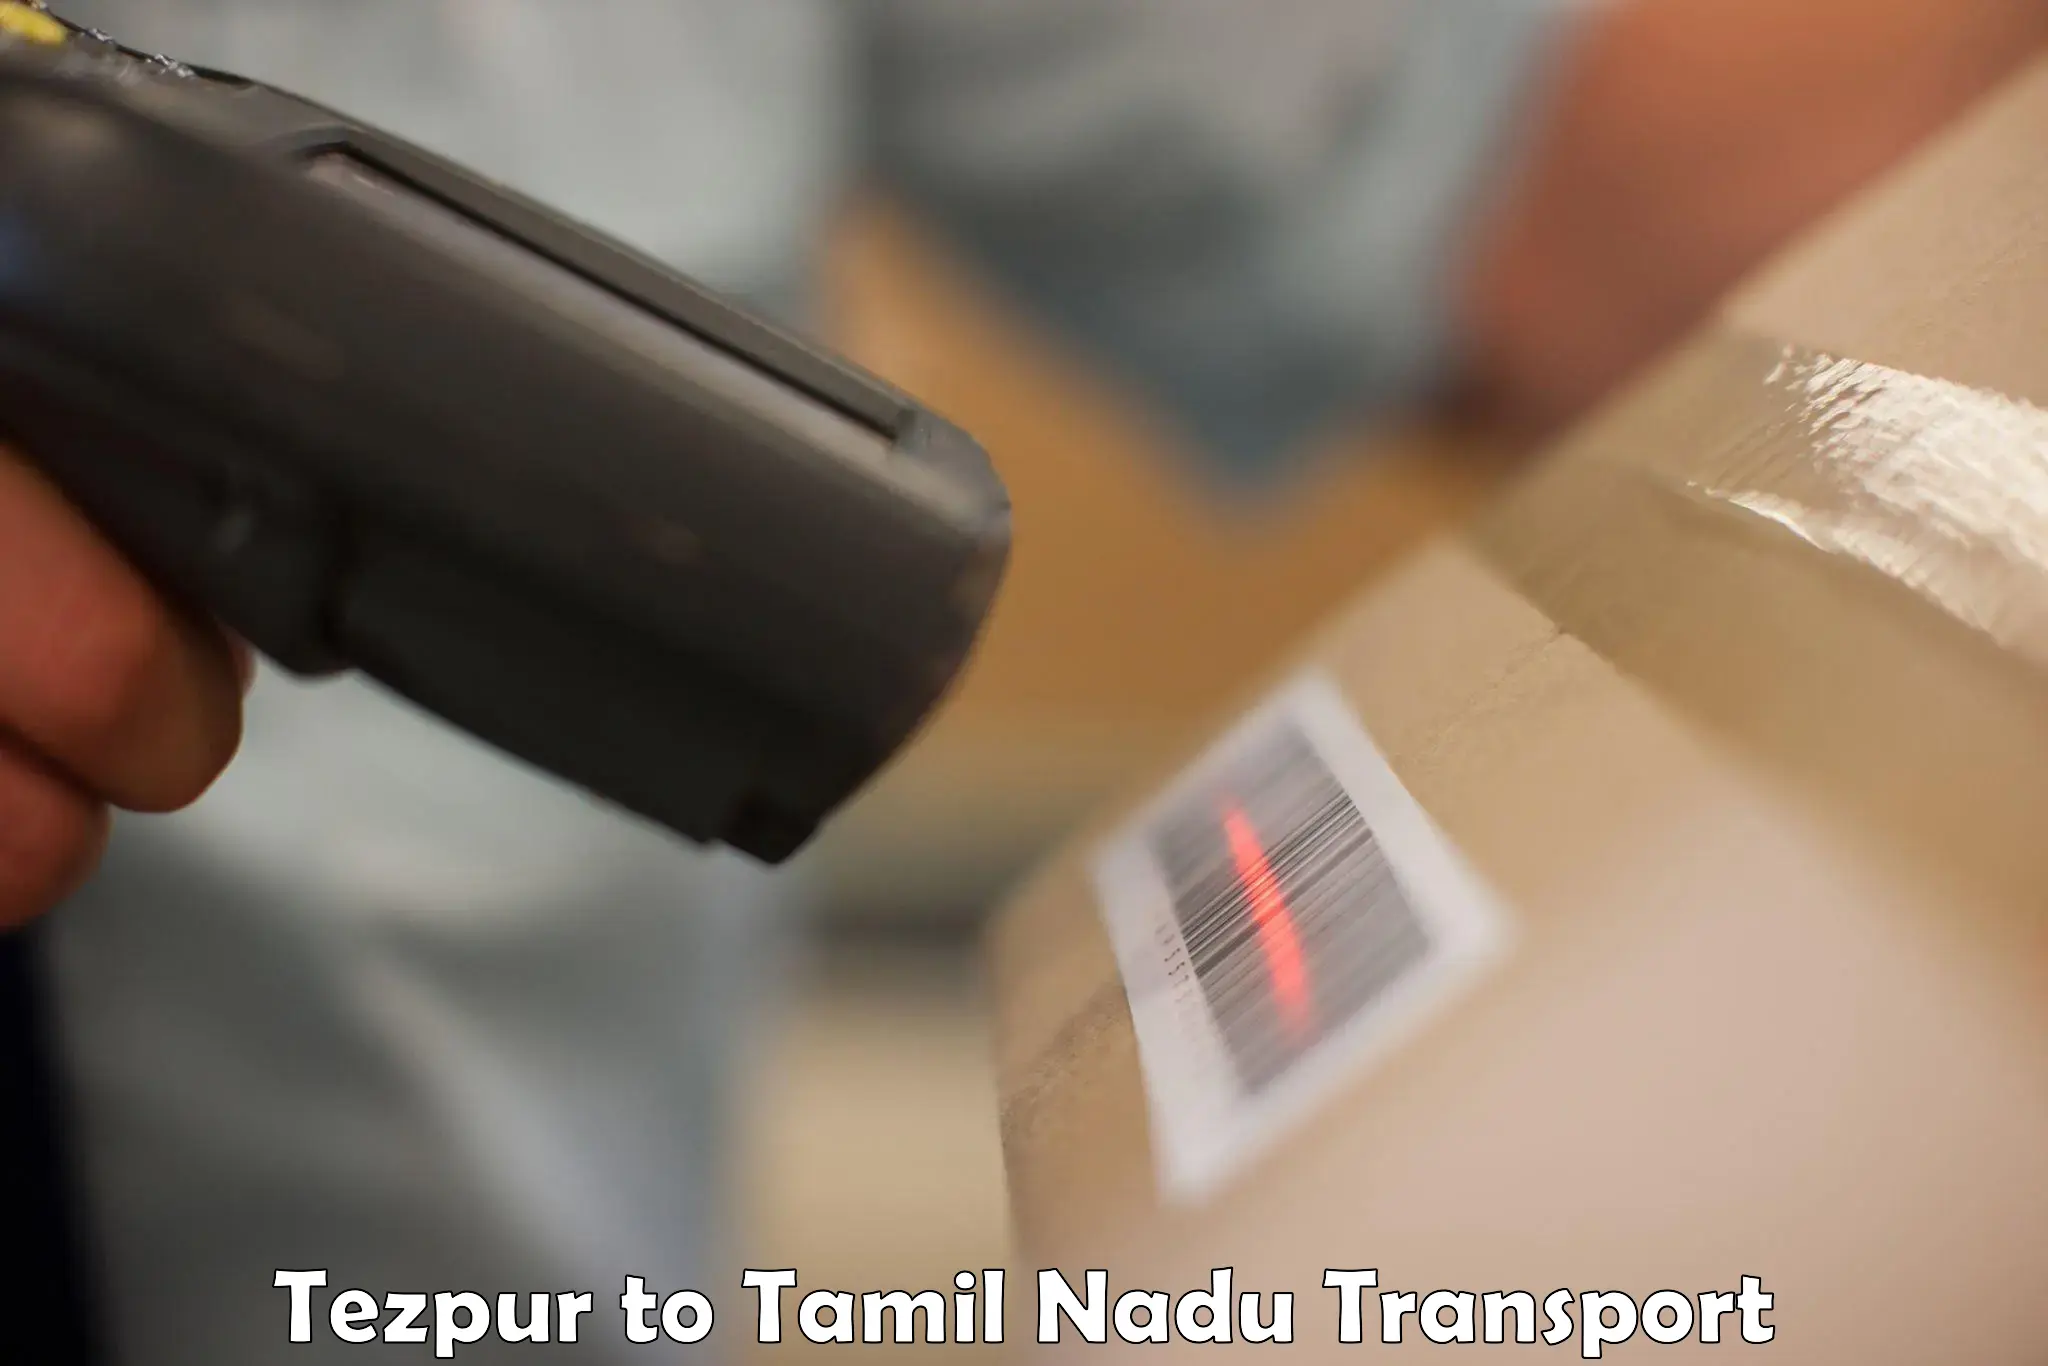 Container transportation services Tezpur to Ennore Port Chennai